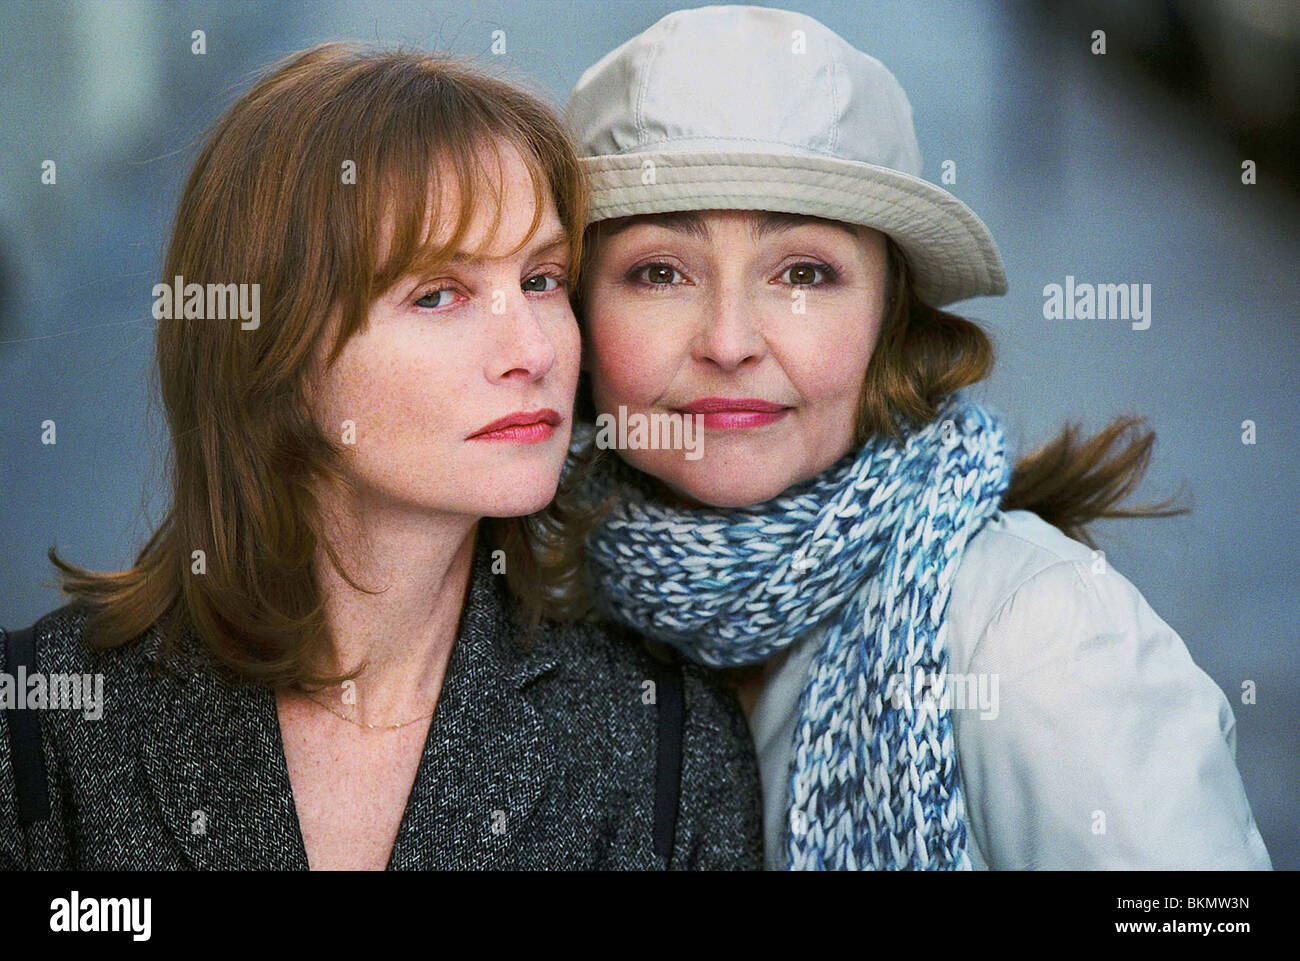 Les Soeurs High Resolution Stock Photography and Images - Alamy